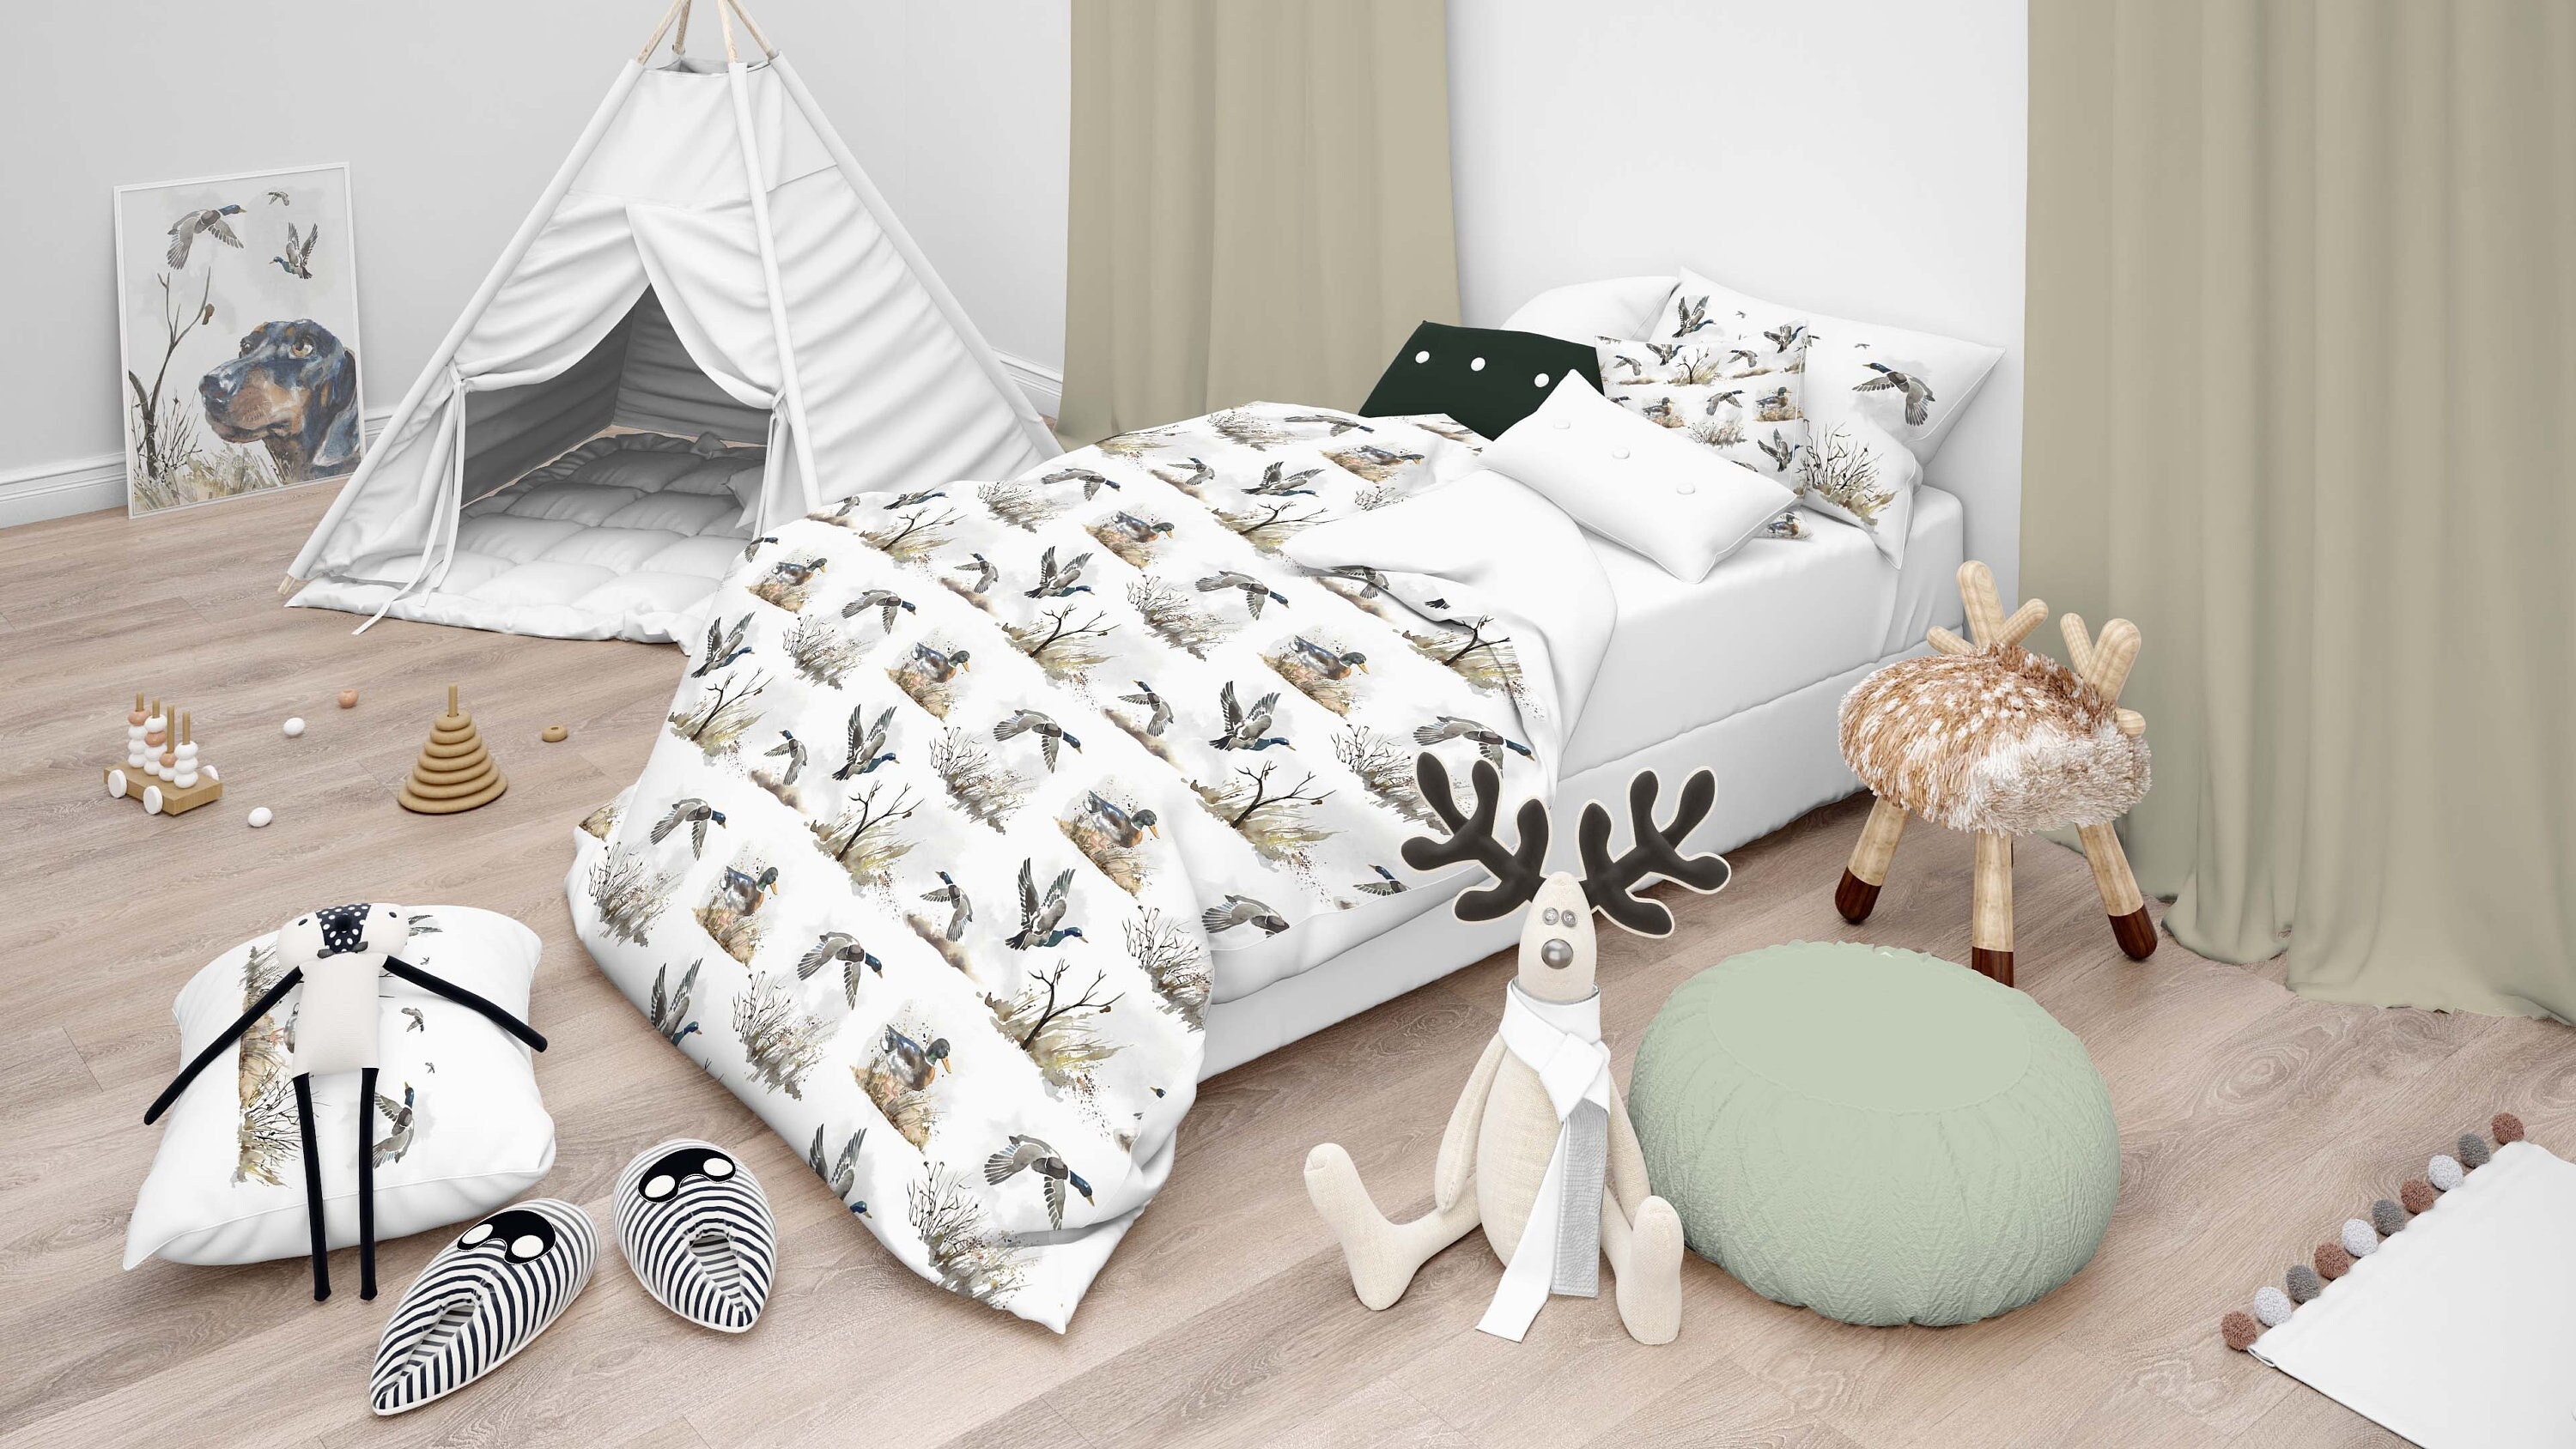 fishing bedding sets products for sale